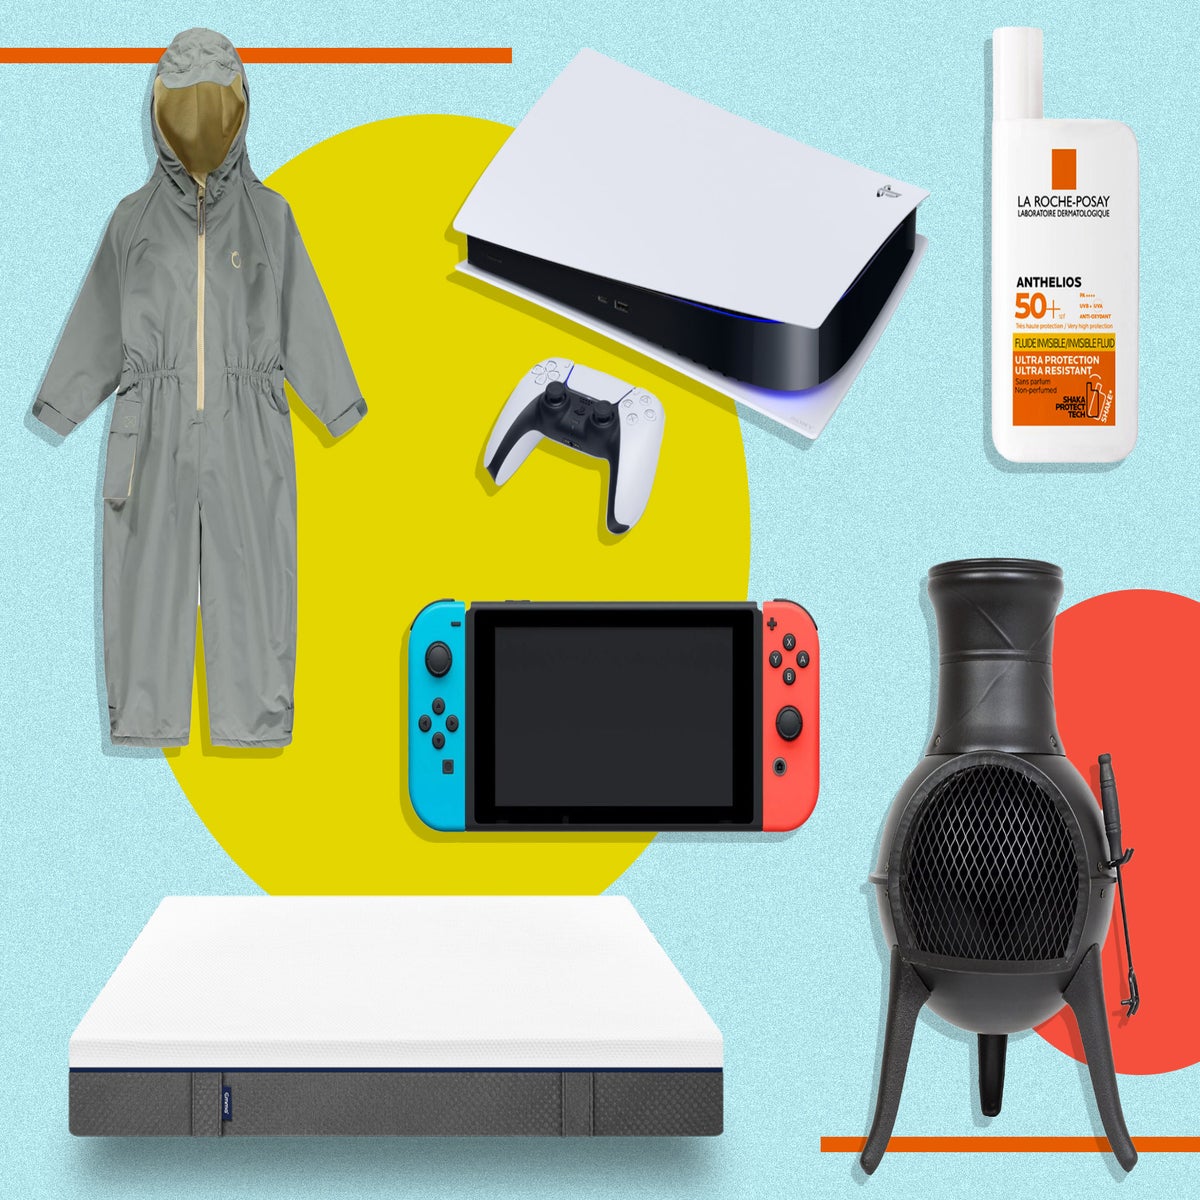 IndyBest's bestselling products from 2021: From PS5 to flowers